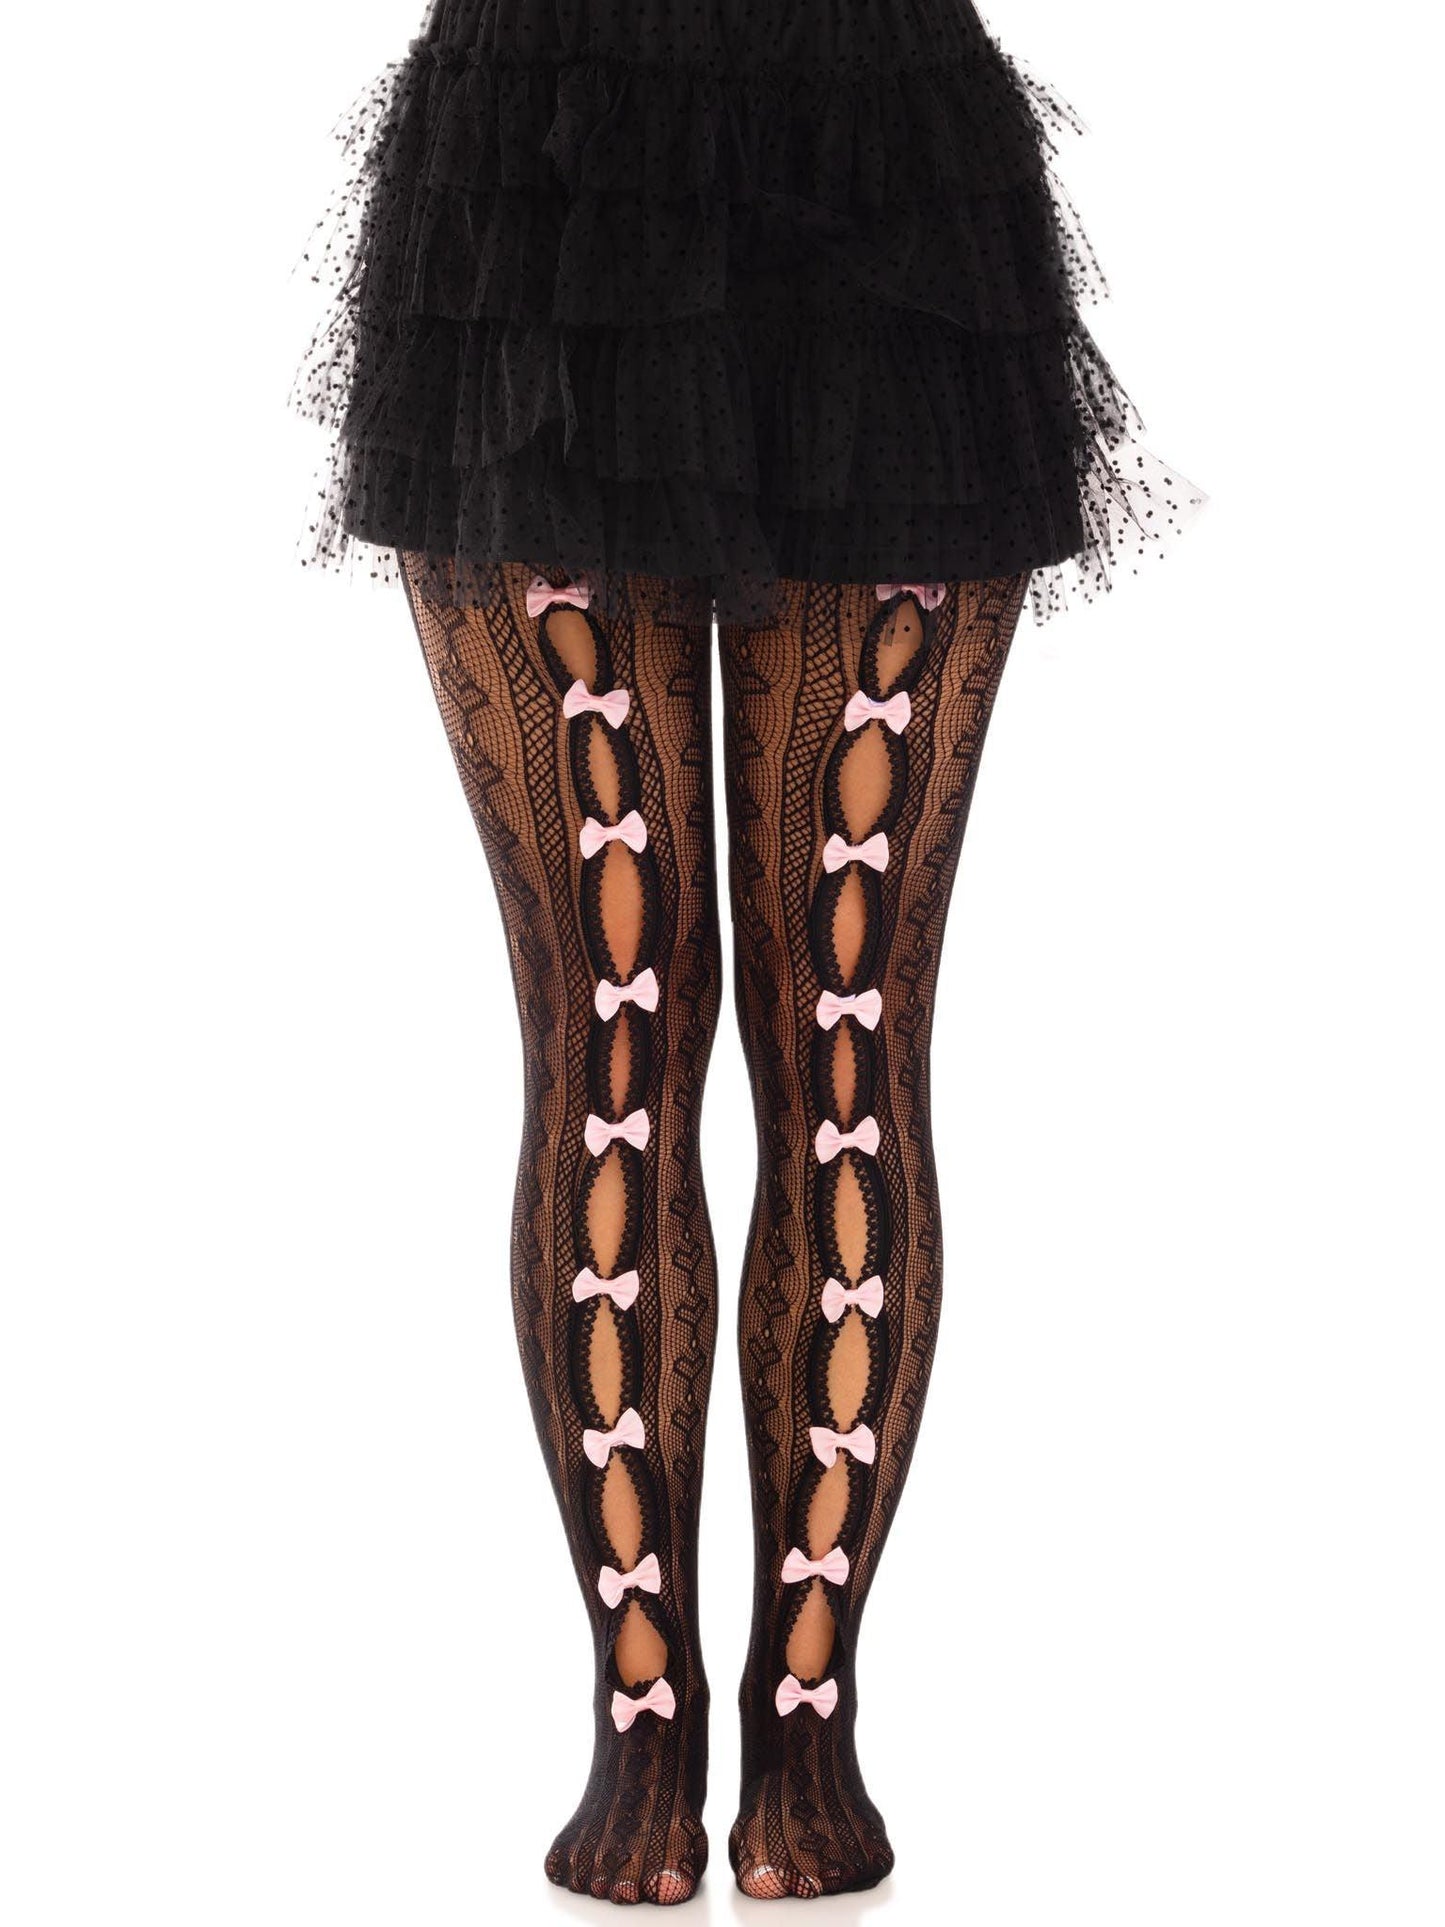 Sweetheart Striped Net Tights With Keyhole and Mini Bow Detail - One Size - Black - Love It Wet